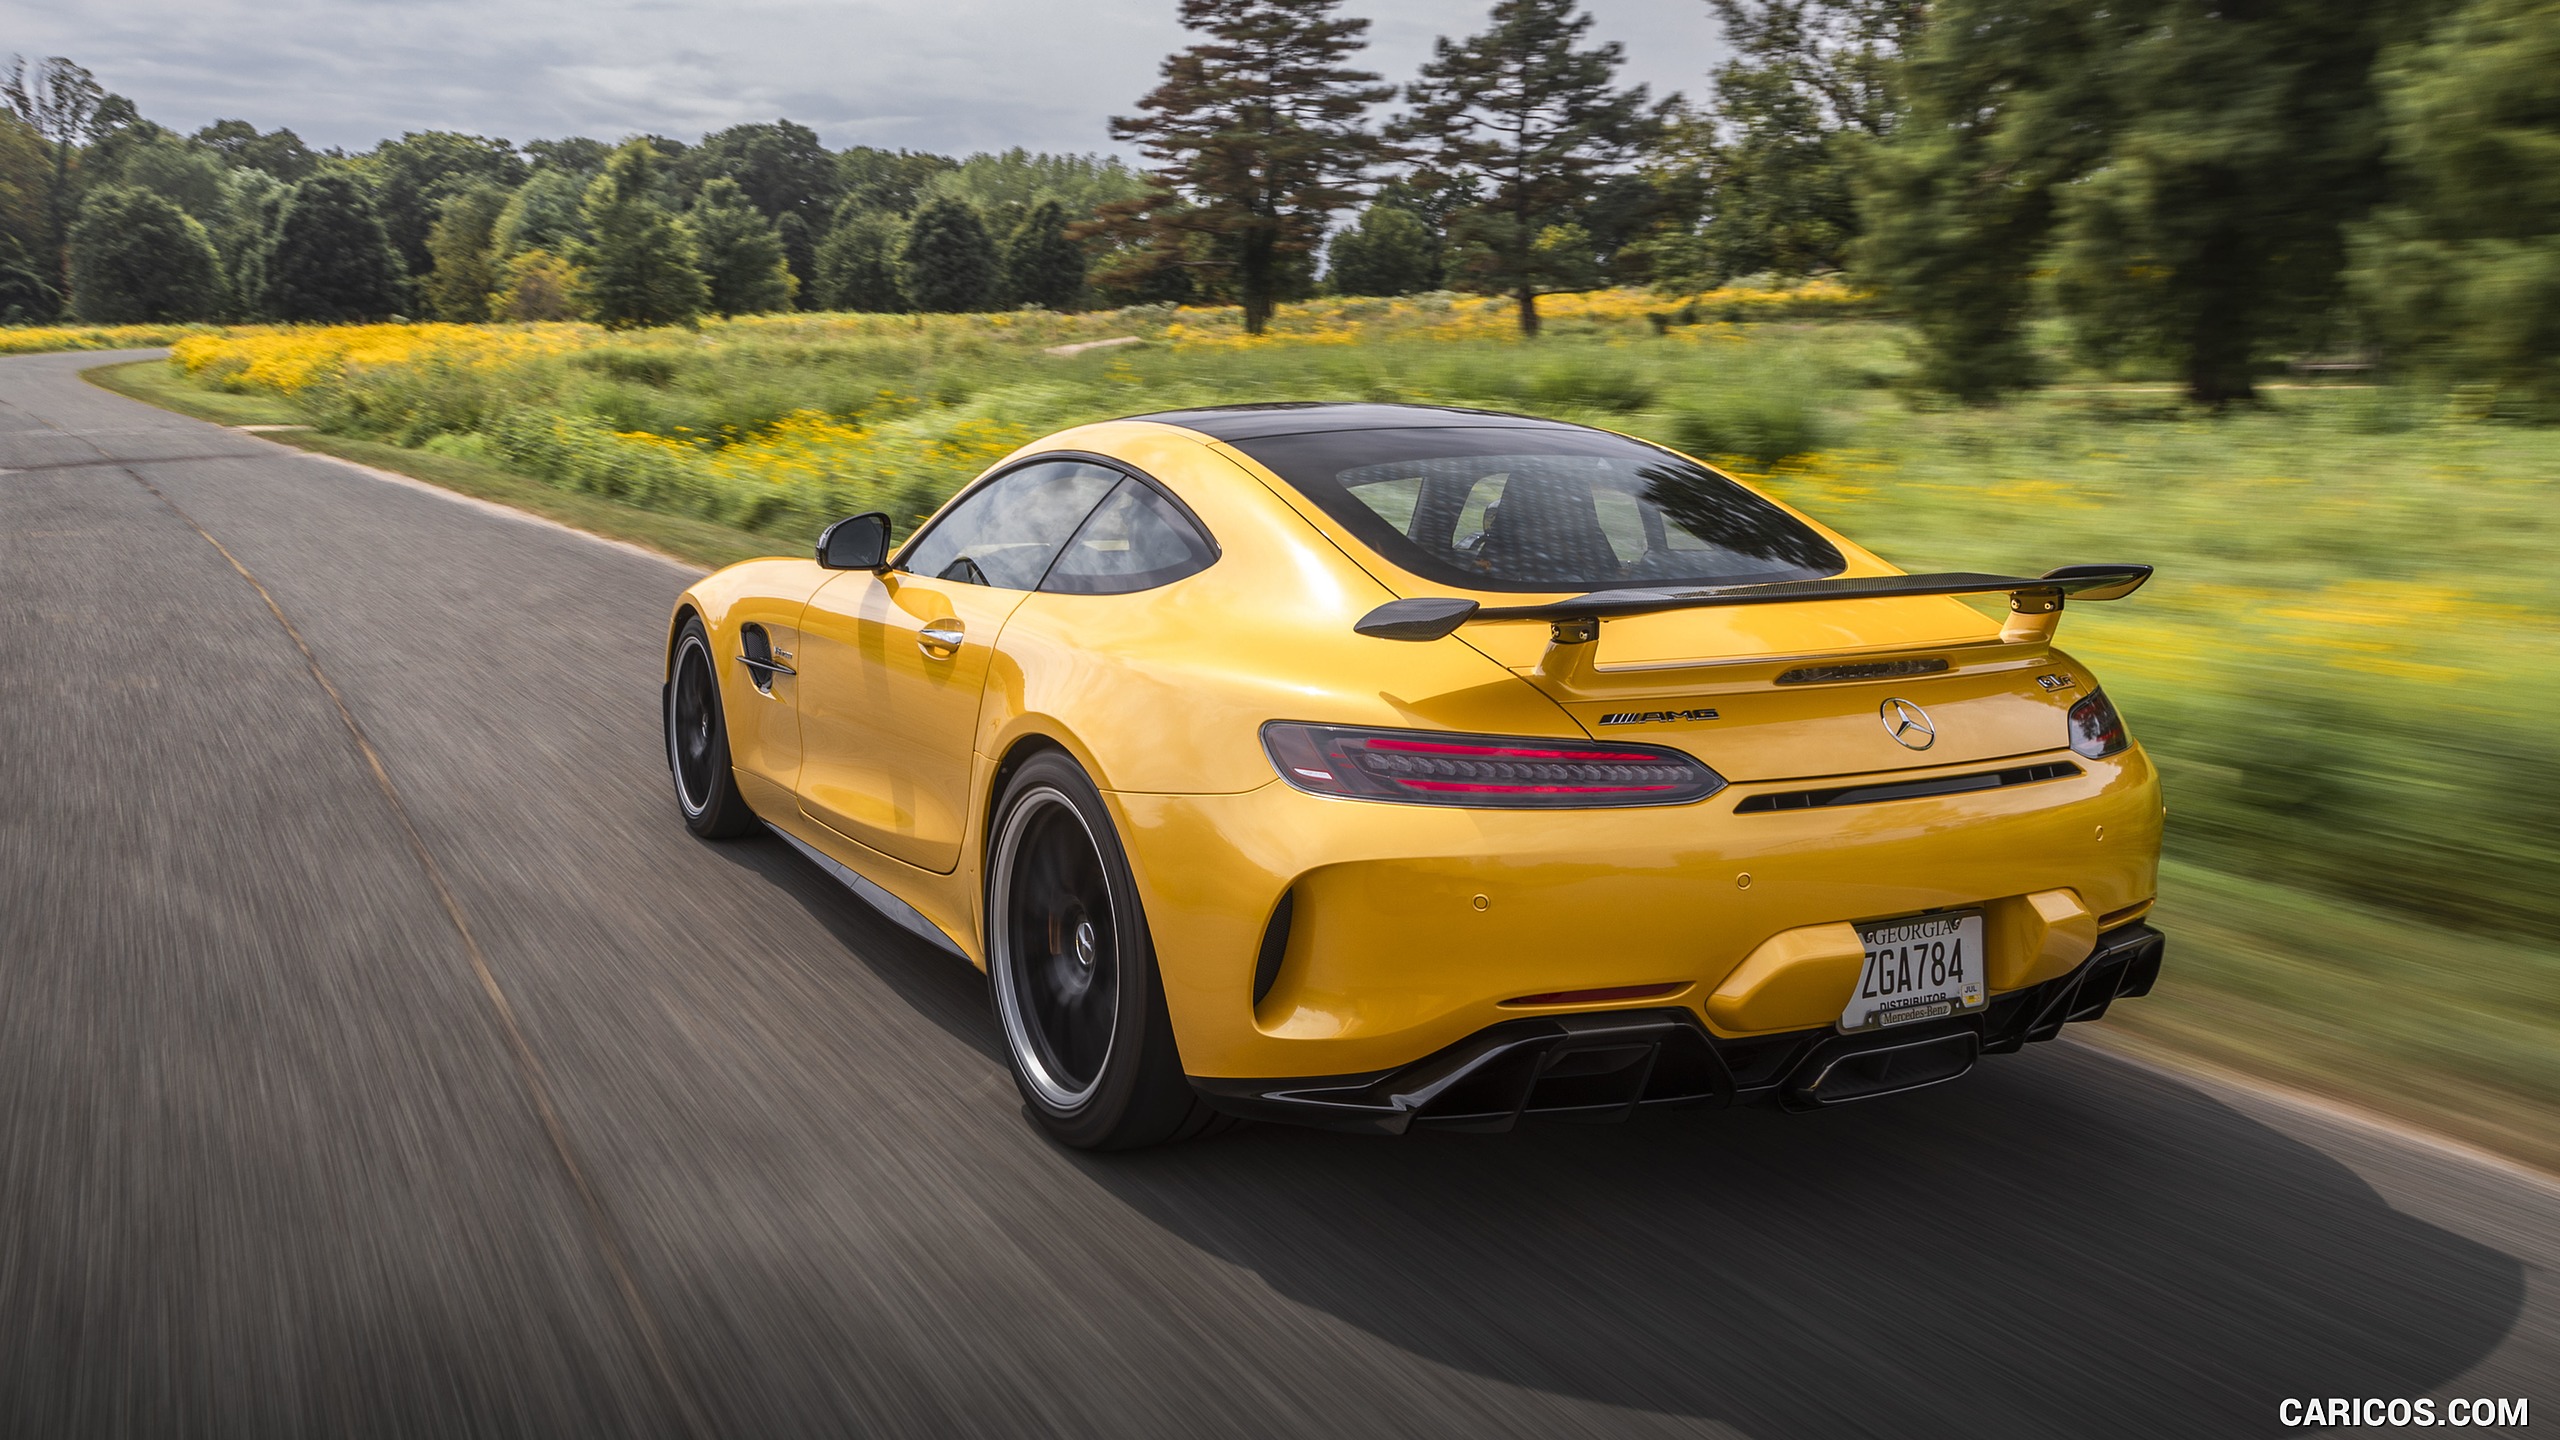 2020 Mercedes-AMG GT R Coupe (US-Spec) - Rear Three-Quarter, #251 of 328